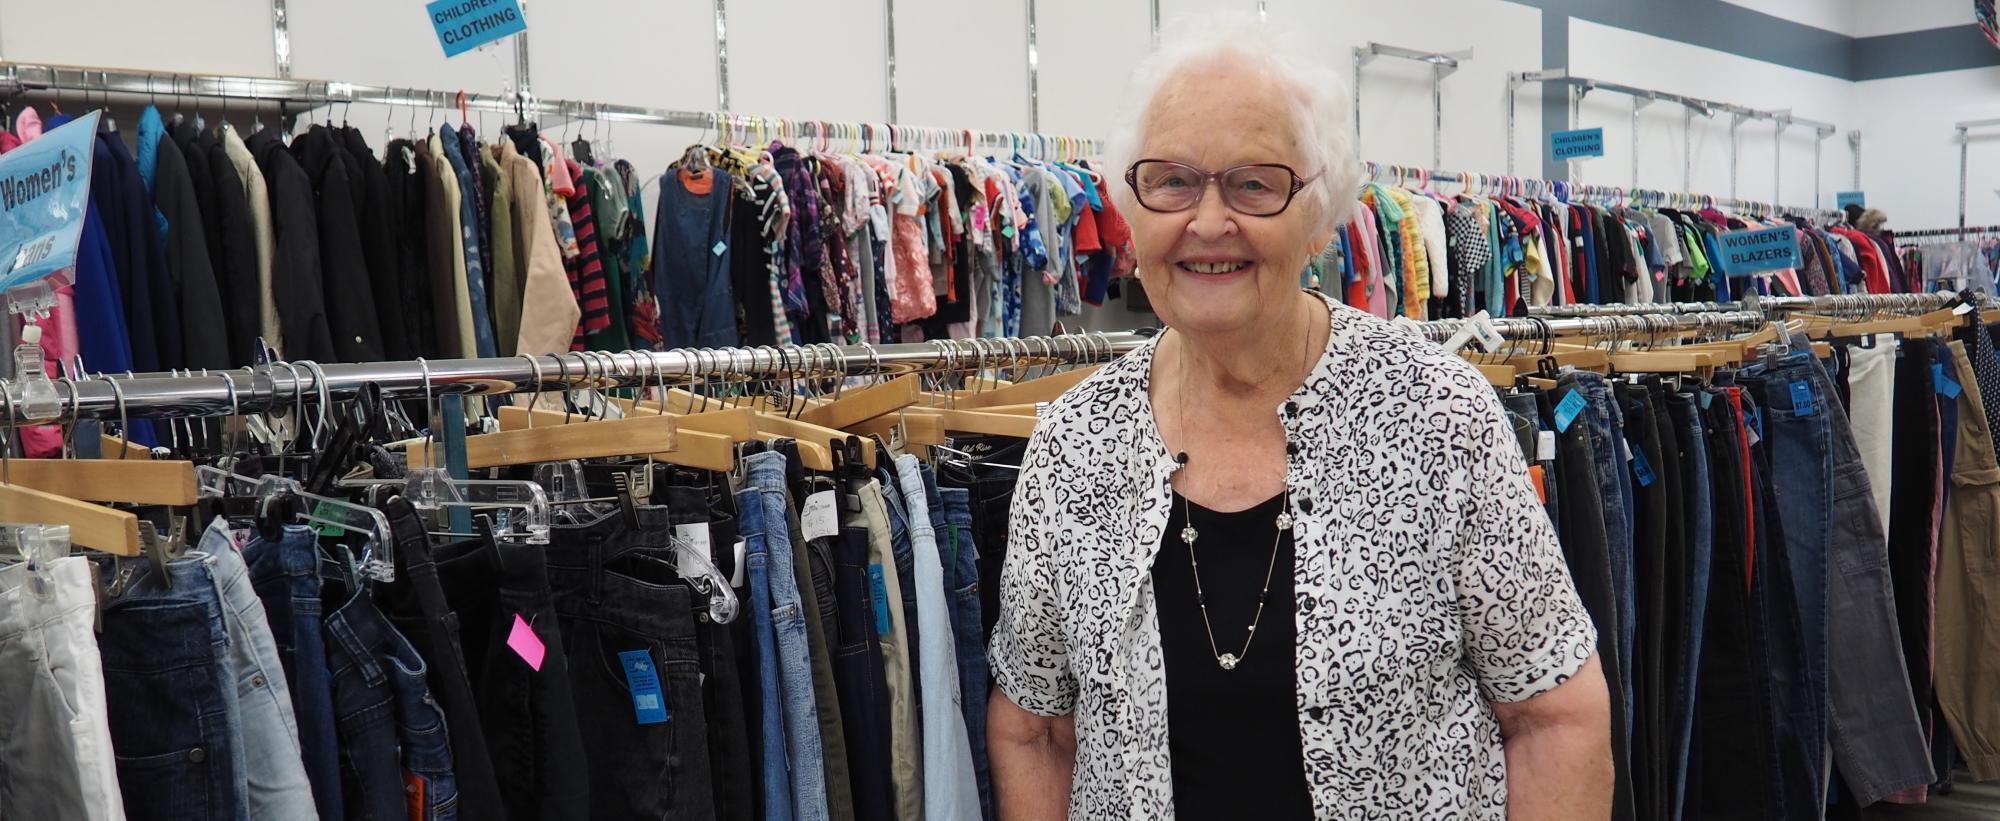 Woman standing in front of two racks of clothing.